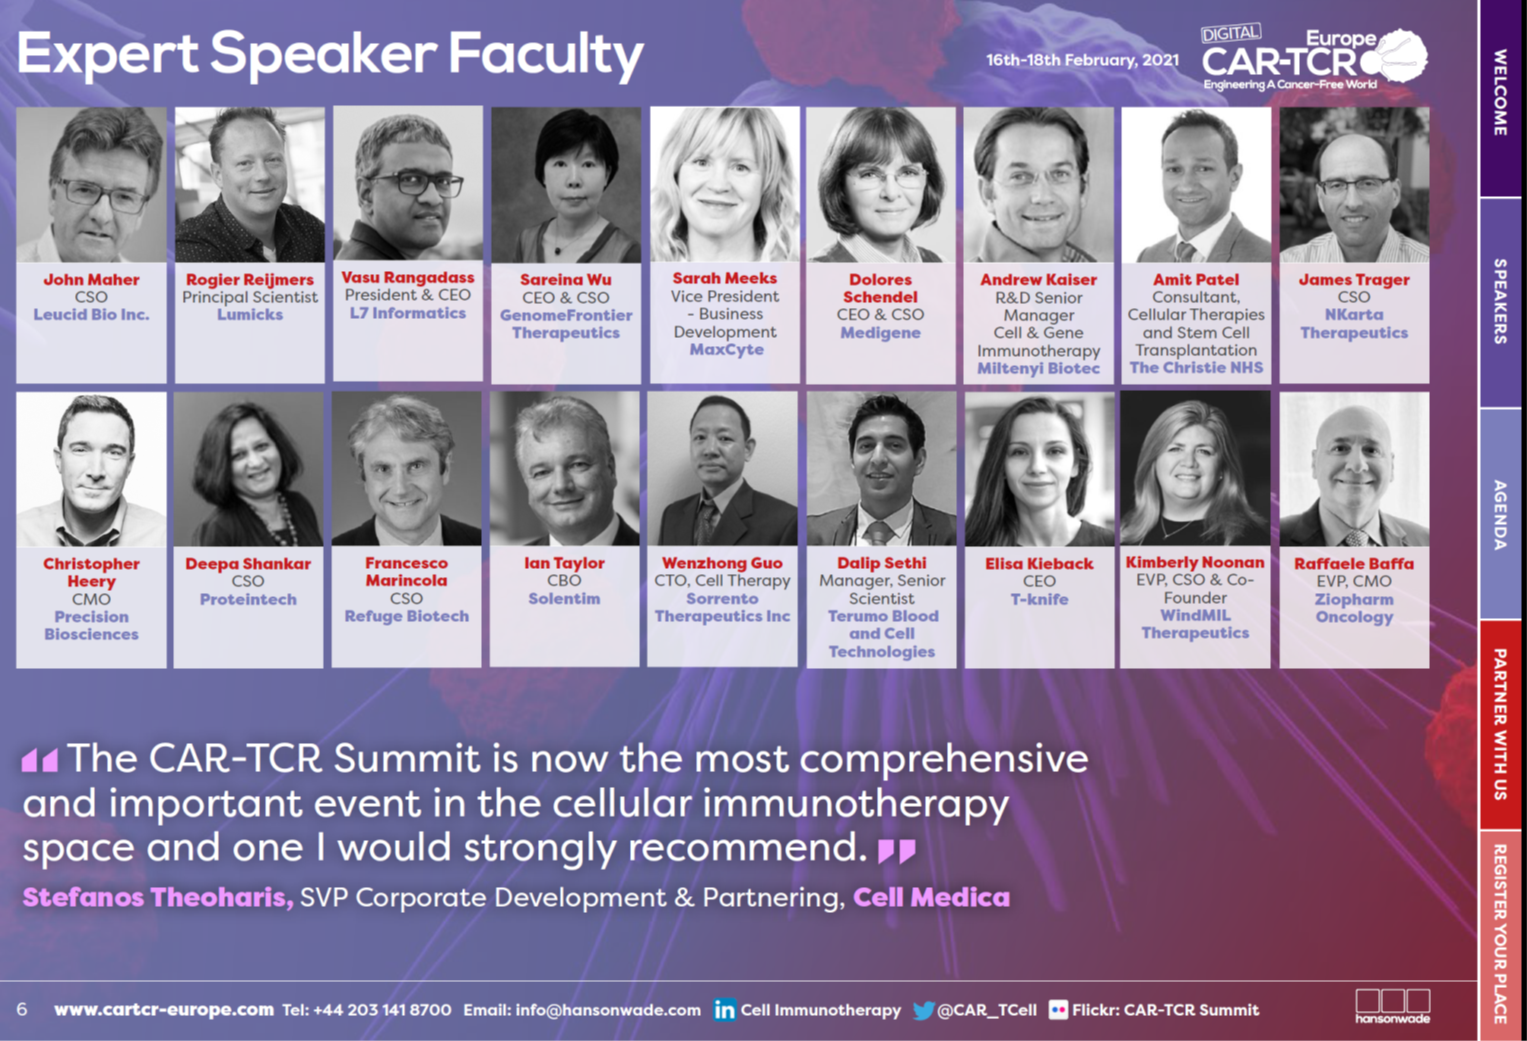 The presentation given by GenomeFrontier’s CSO Sareina Wu was identified as one of the most interesting and valuable at the CAR-TCR EU Summit 2021!